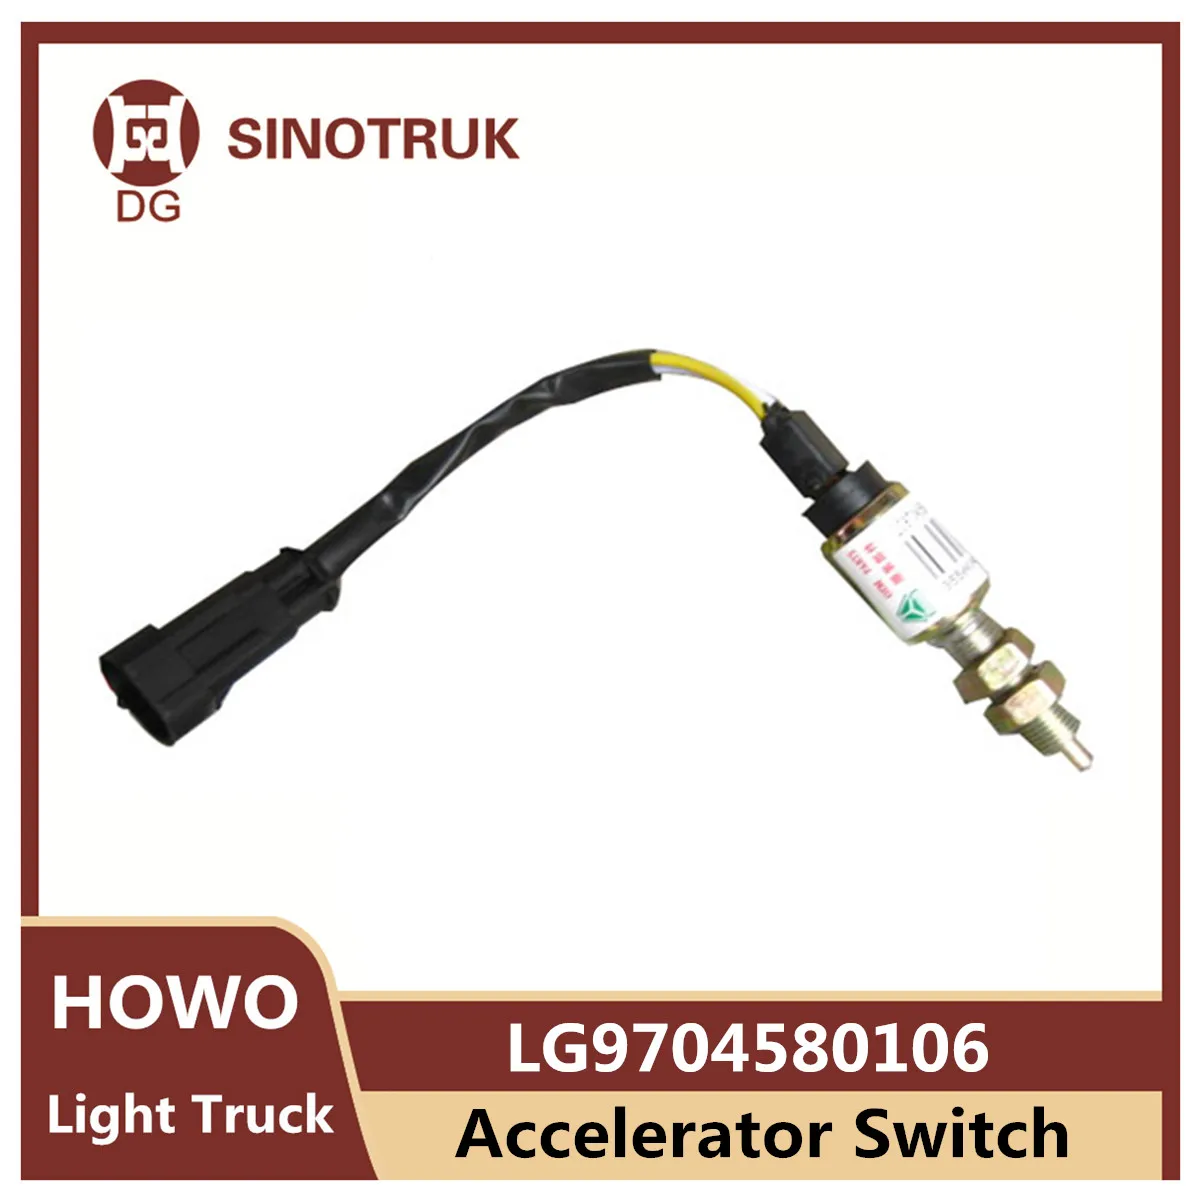 Accelerator Switch LG9704580106 for Sinotruk Howo Light Truck Clutch Switch Original Auto Truck Parts cab lock assembly wg1642440101 for sinotruk howo sitrak a7 t7 c7h dump tractor truck parts